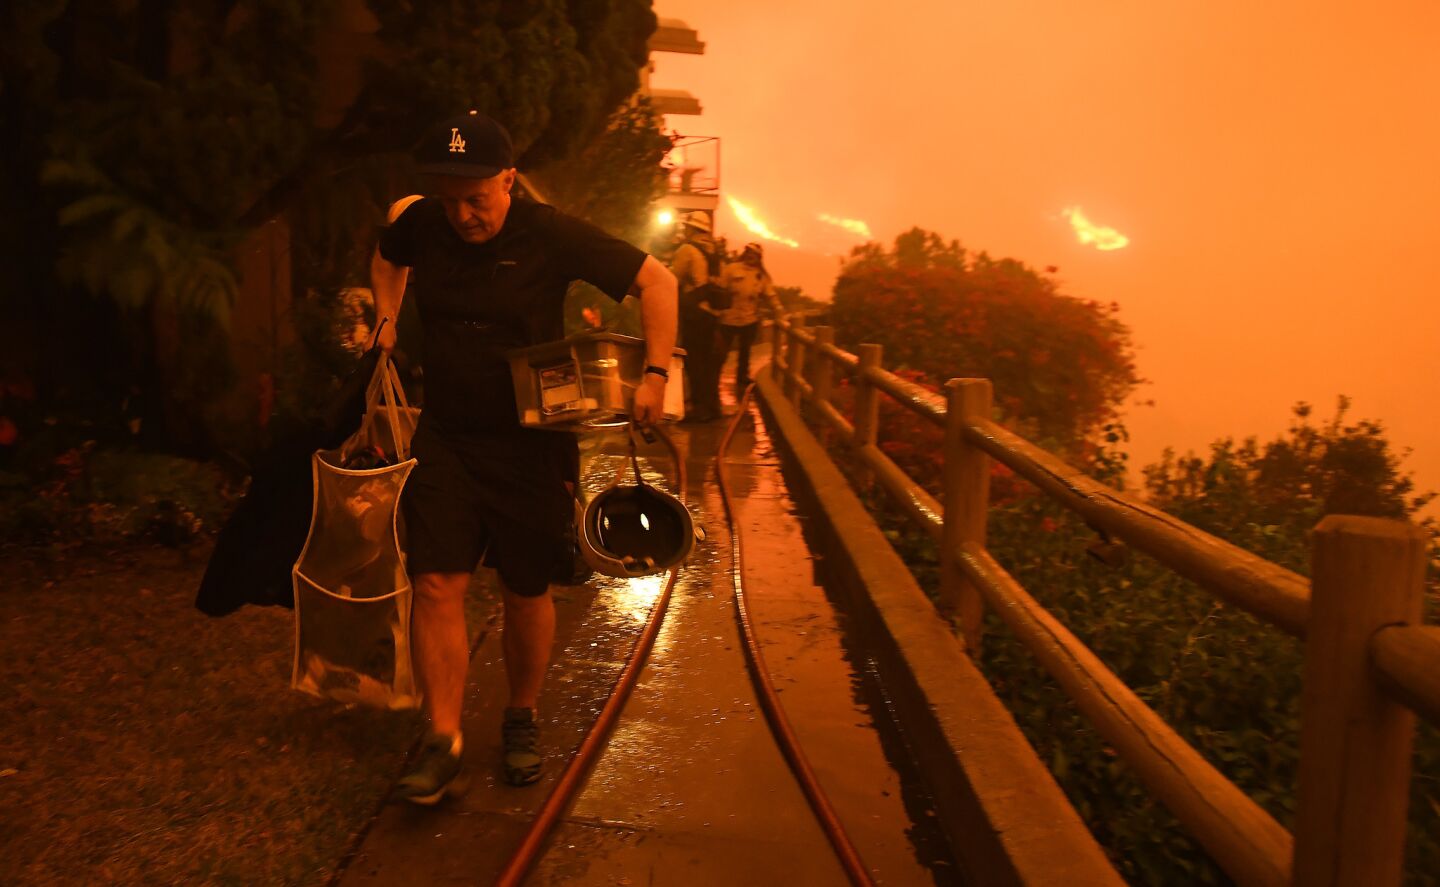 Resident Brett Hammond evacuates in Malibu as the Woolsey Fire approaches.